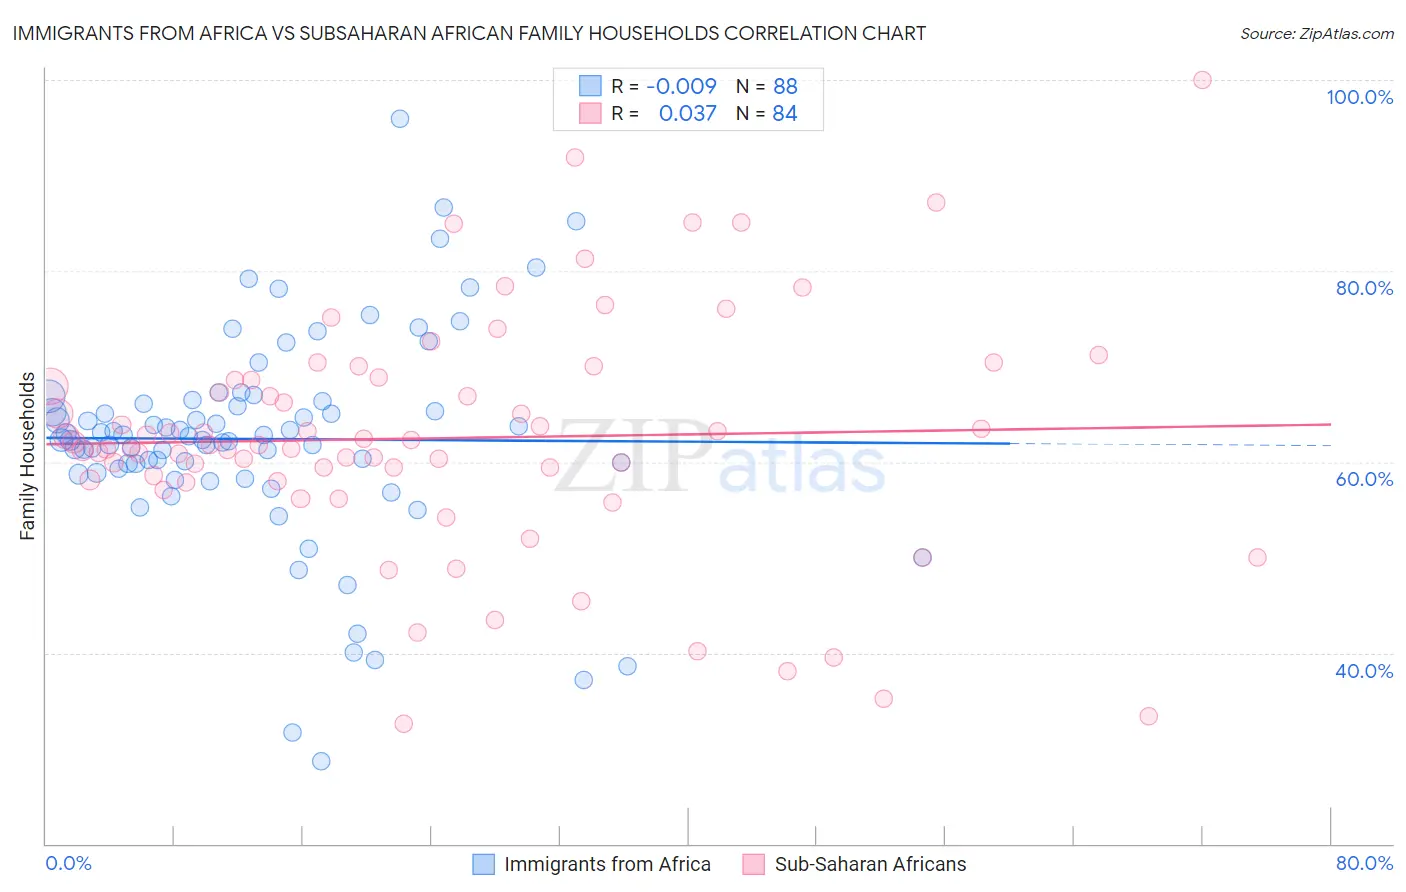 Immigrants from Africa vs Subsaharan African Family Households